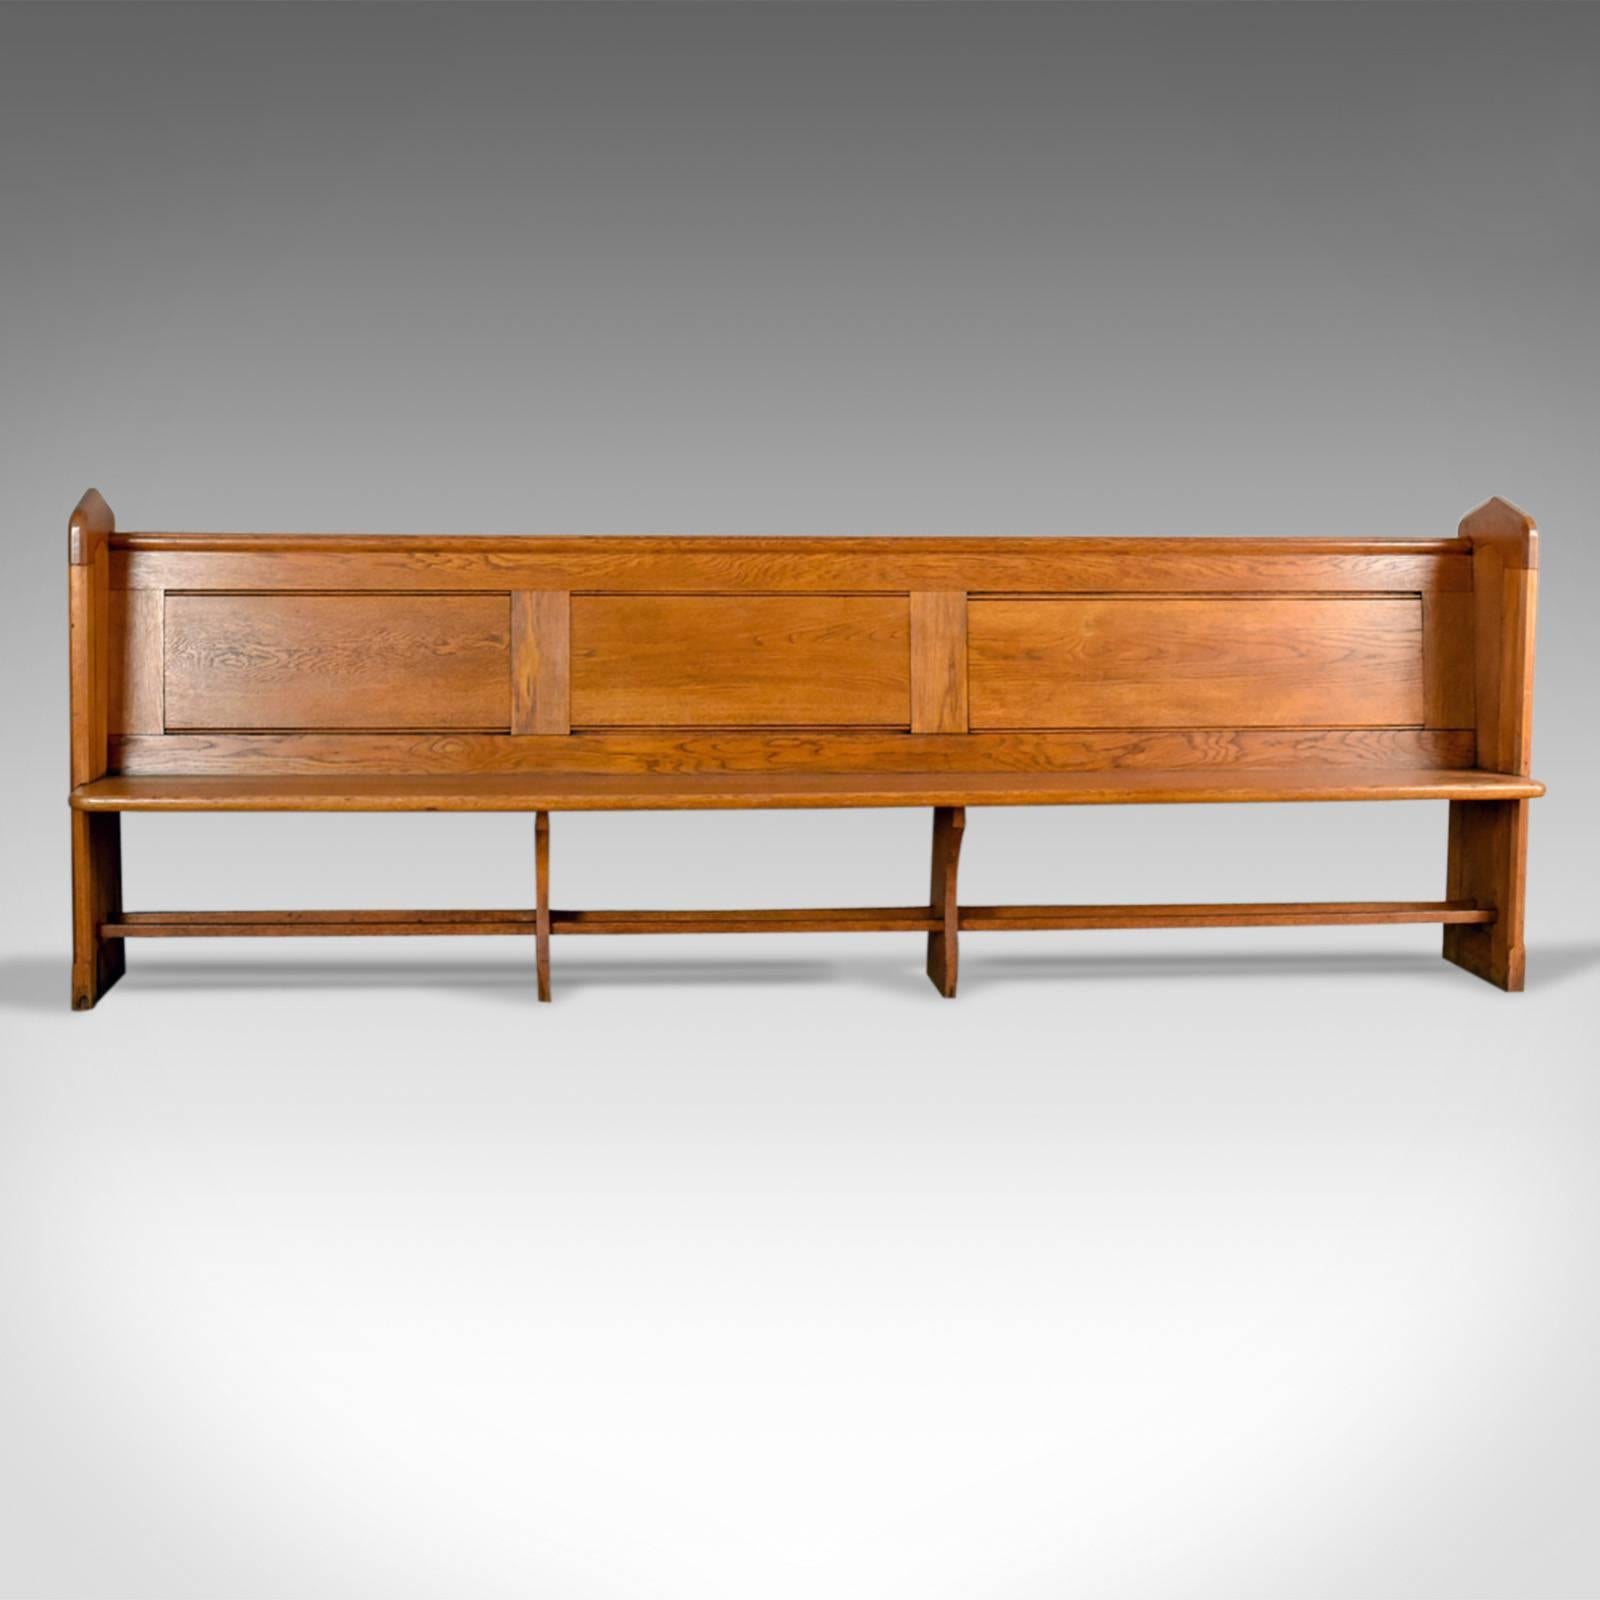 This is an antique pew, an English, oak, Victorian church bench with Pugin-esque Gothic overtones dating circa 1880.

Attractive honey tones to the English oak with a desirable aged patina
Displaying grain interest through the wax polished